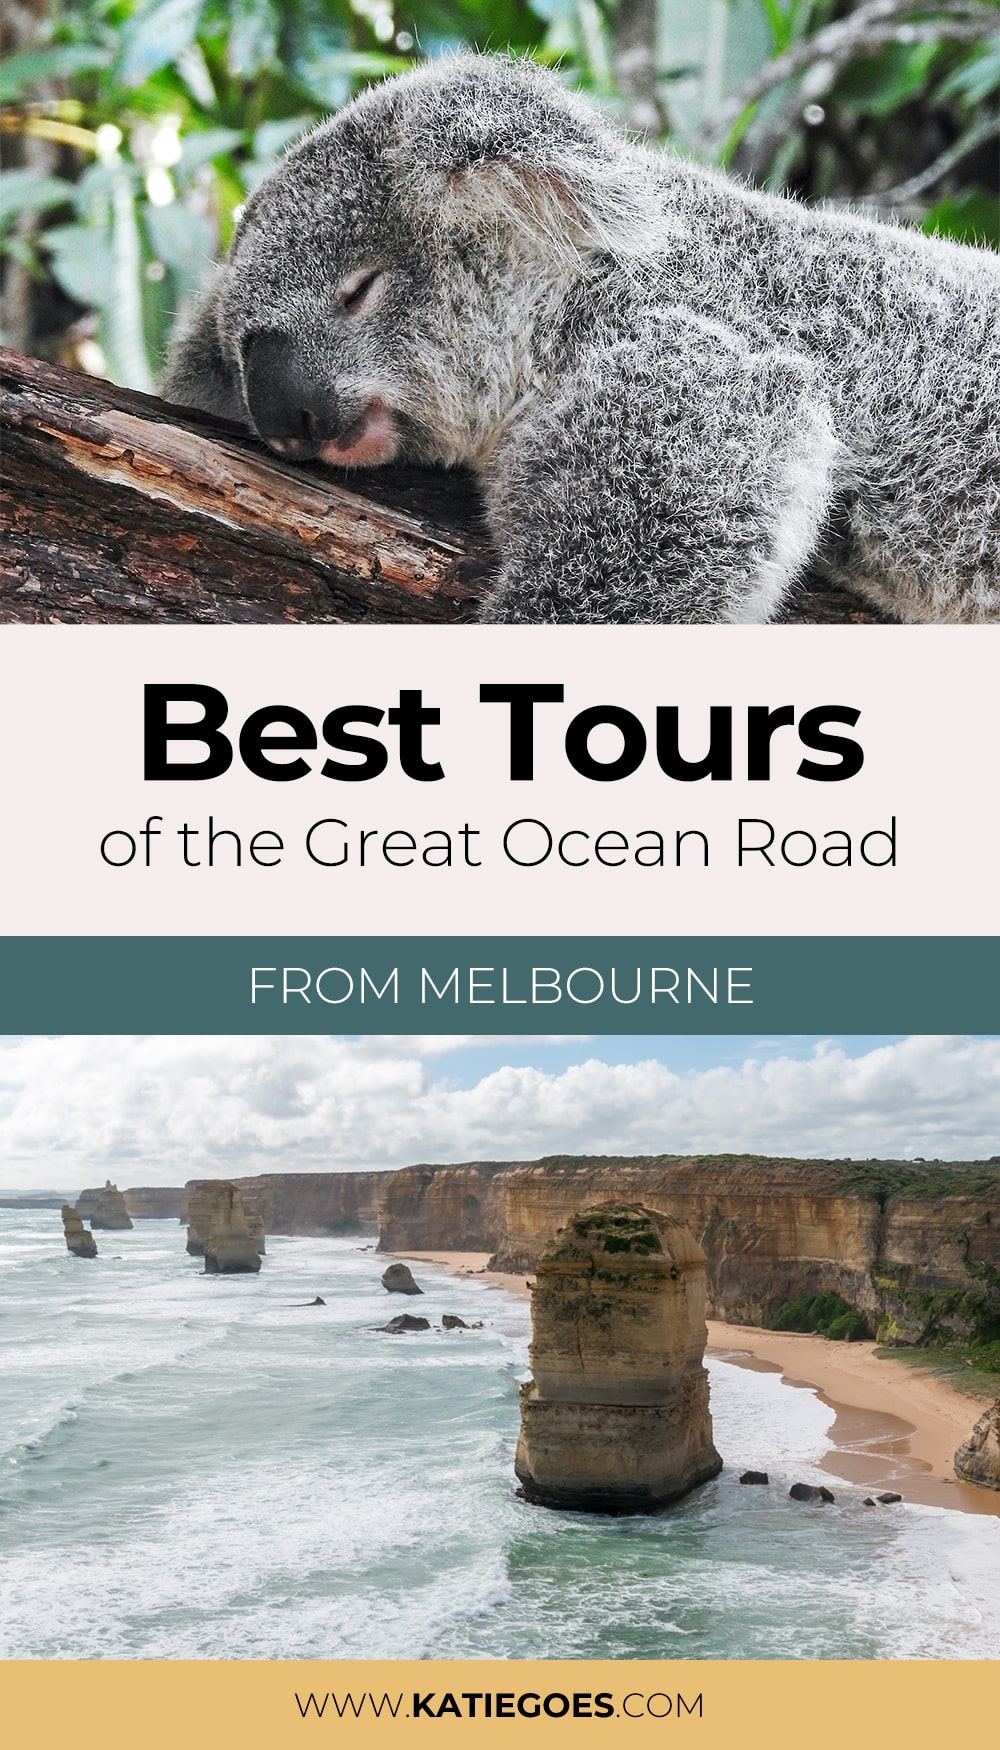 Best Tours of the Great Ocean Road from Melbourne